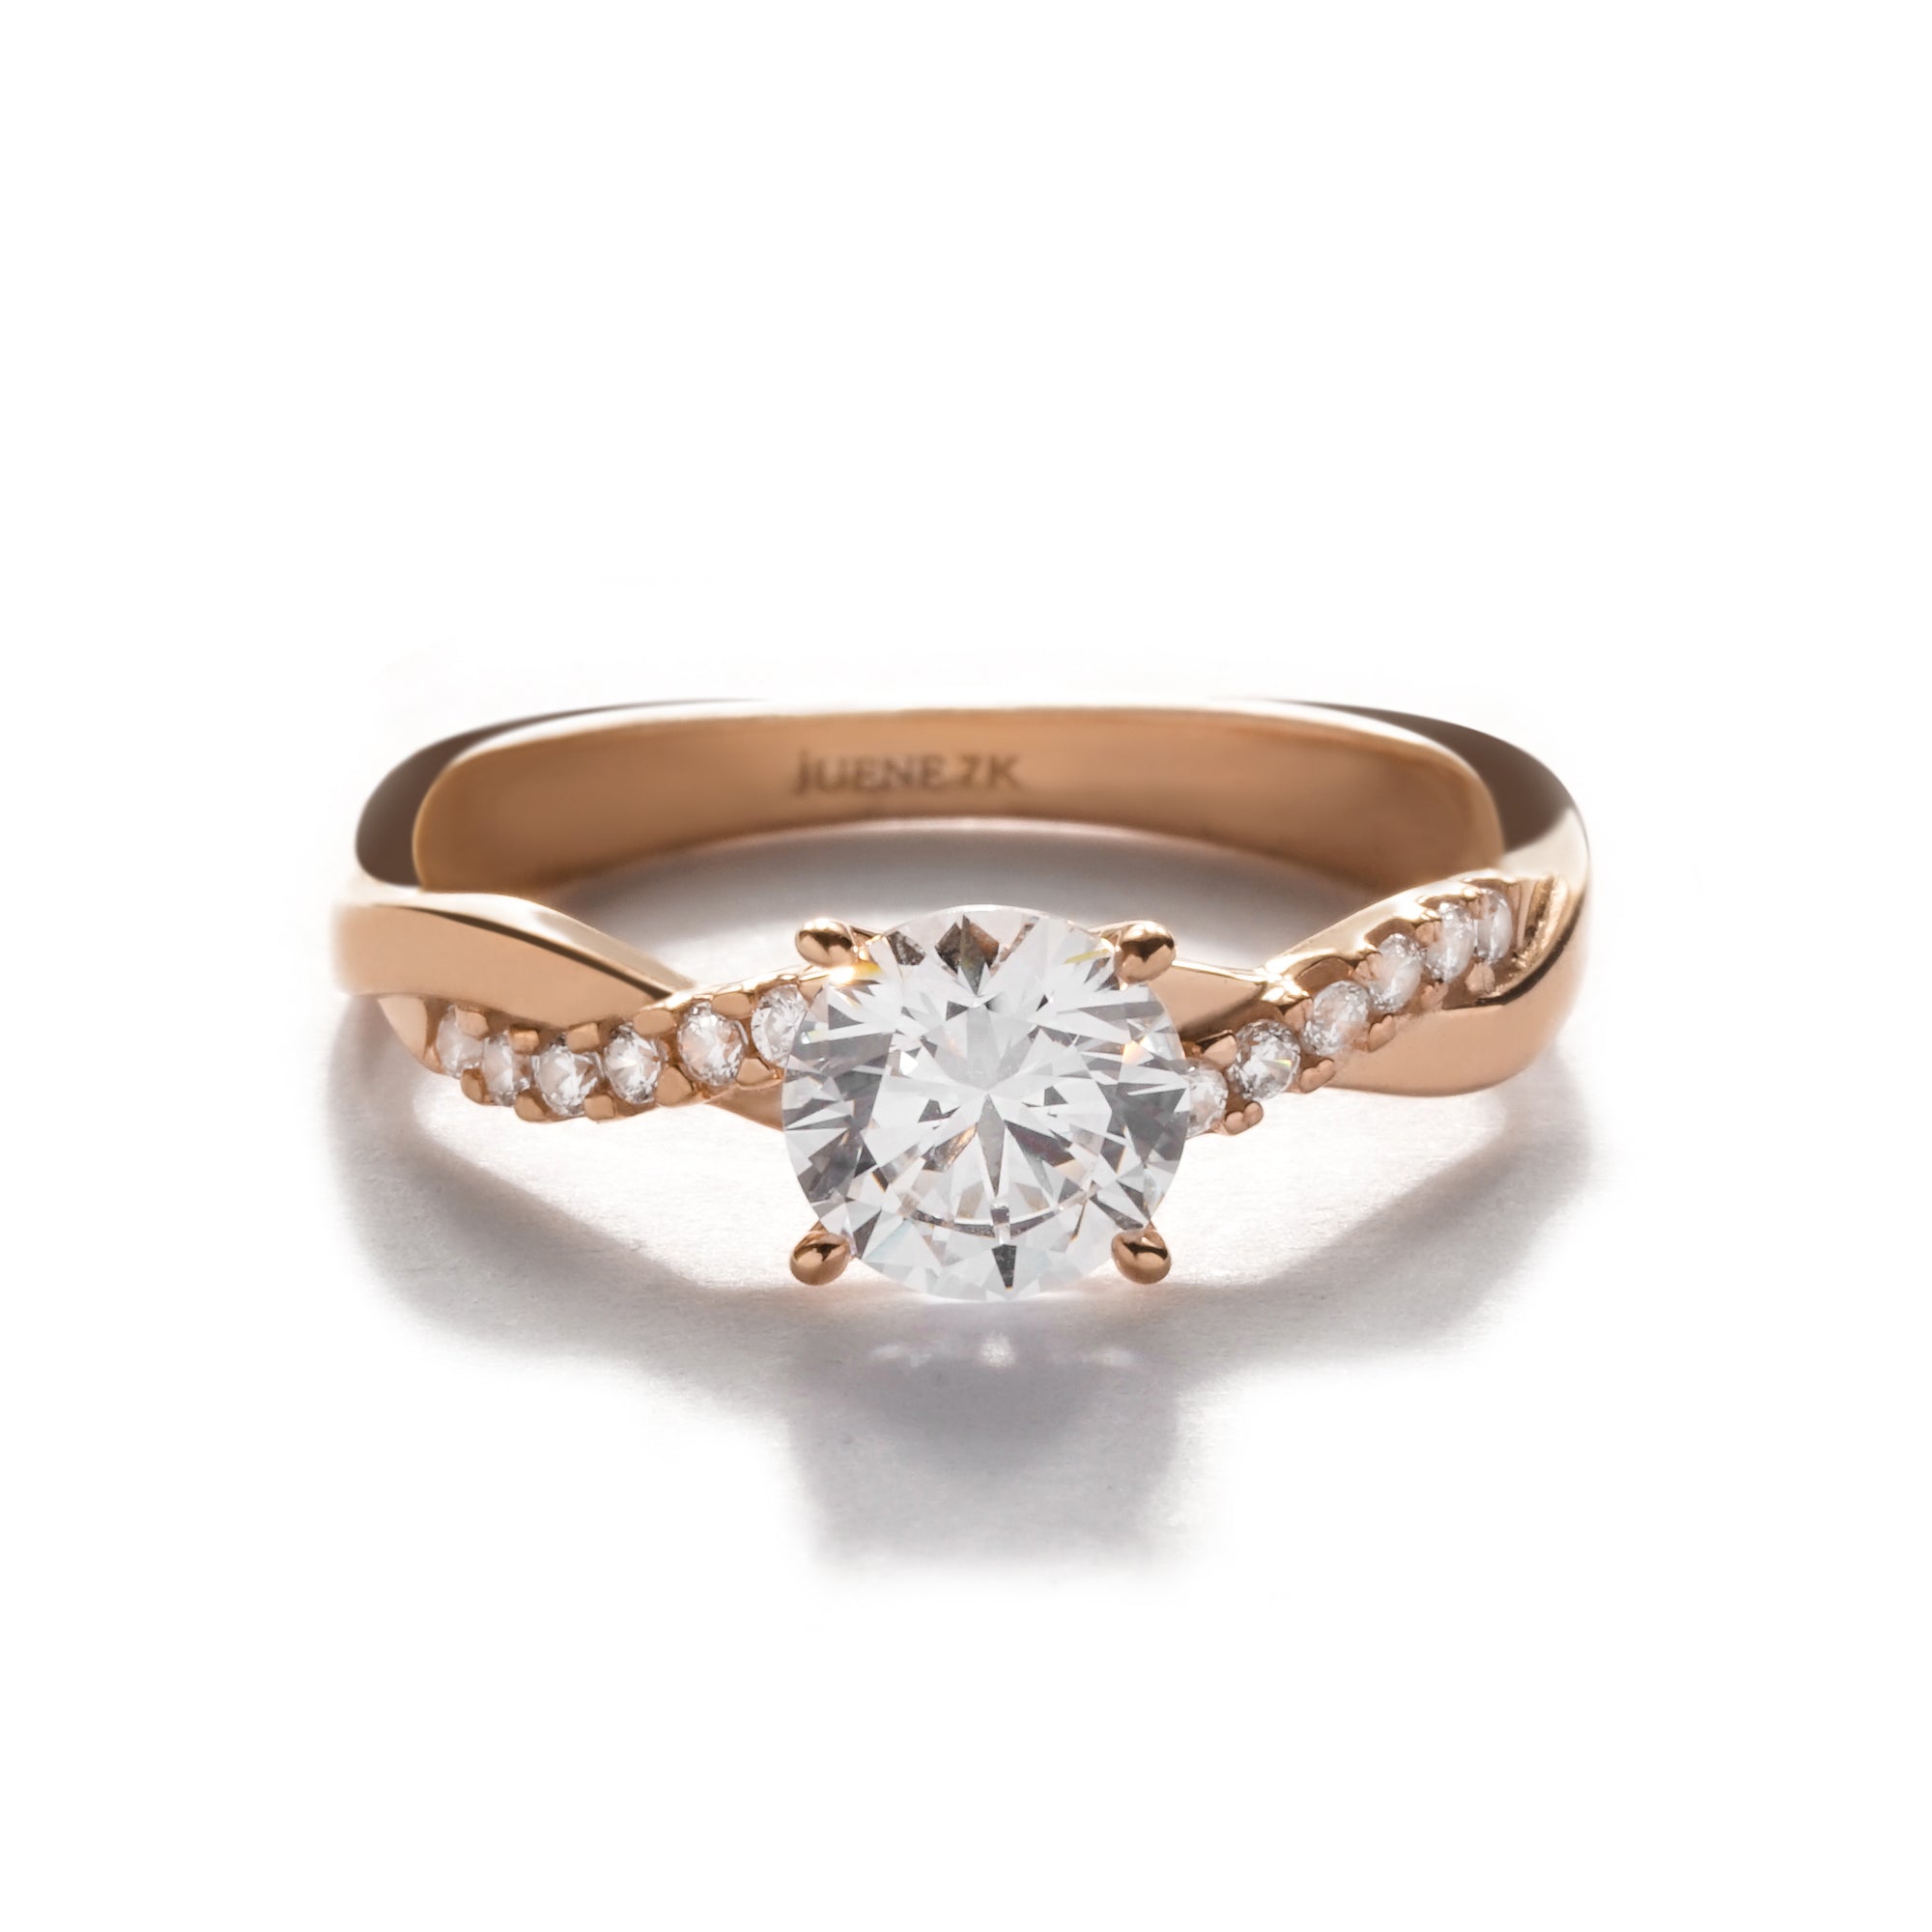 Blair Solitaire Gold Ring - Florence - Juene Jewelry